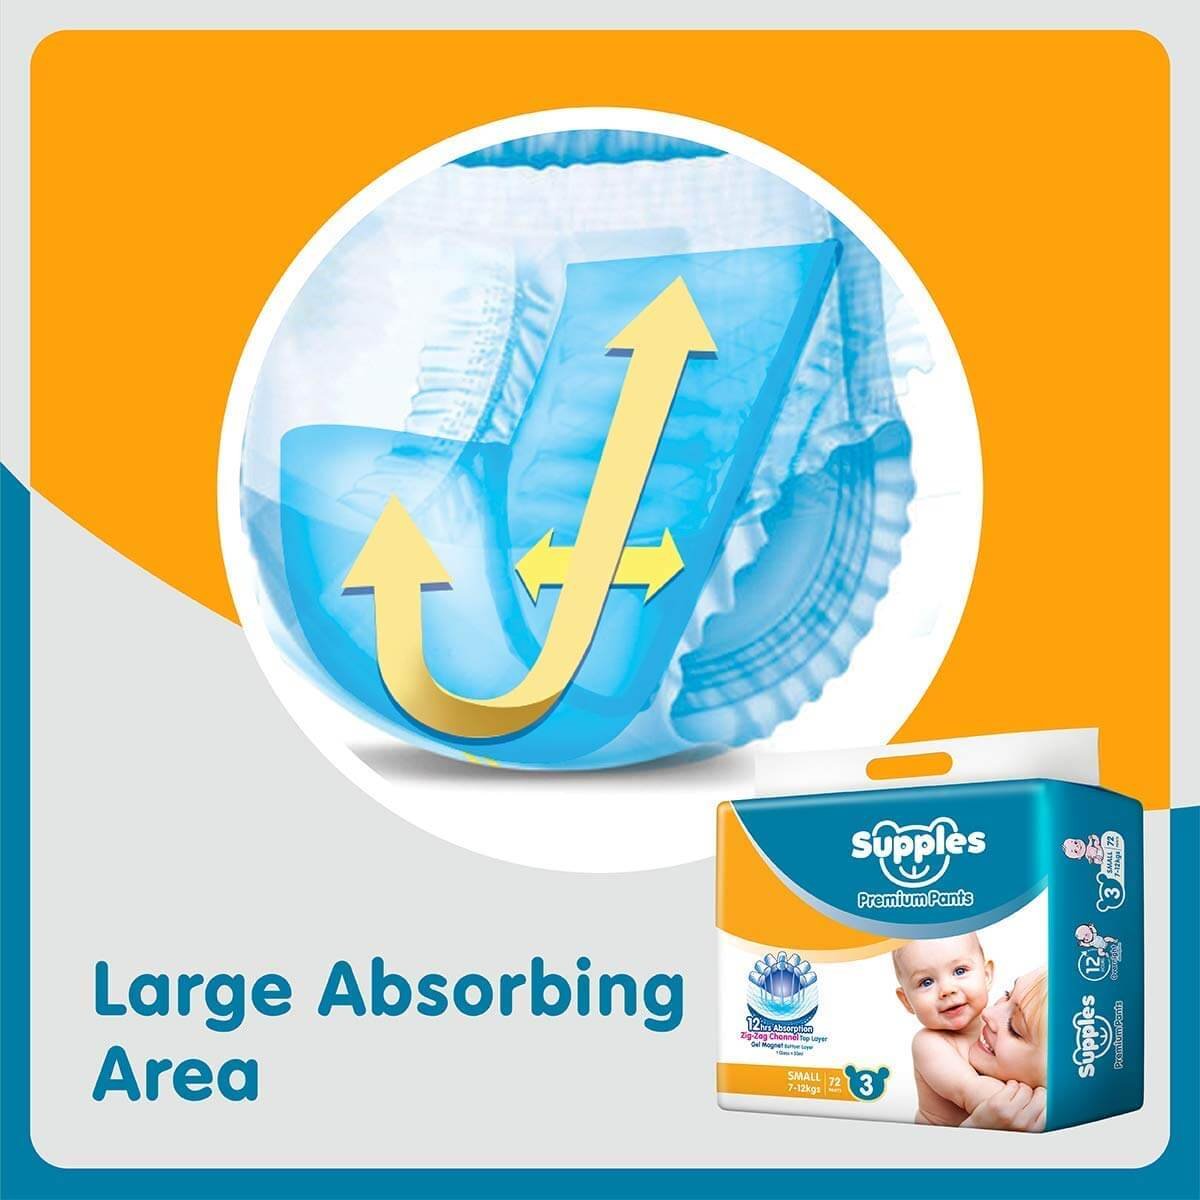 https://shoppingyatra.com/product_images/Supples Baby Pants Diapers, Medium (7-12 kg), 72 Count5.jpg